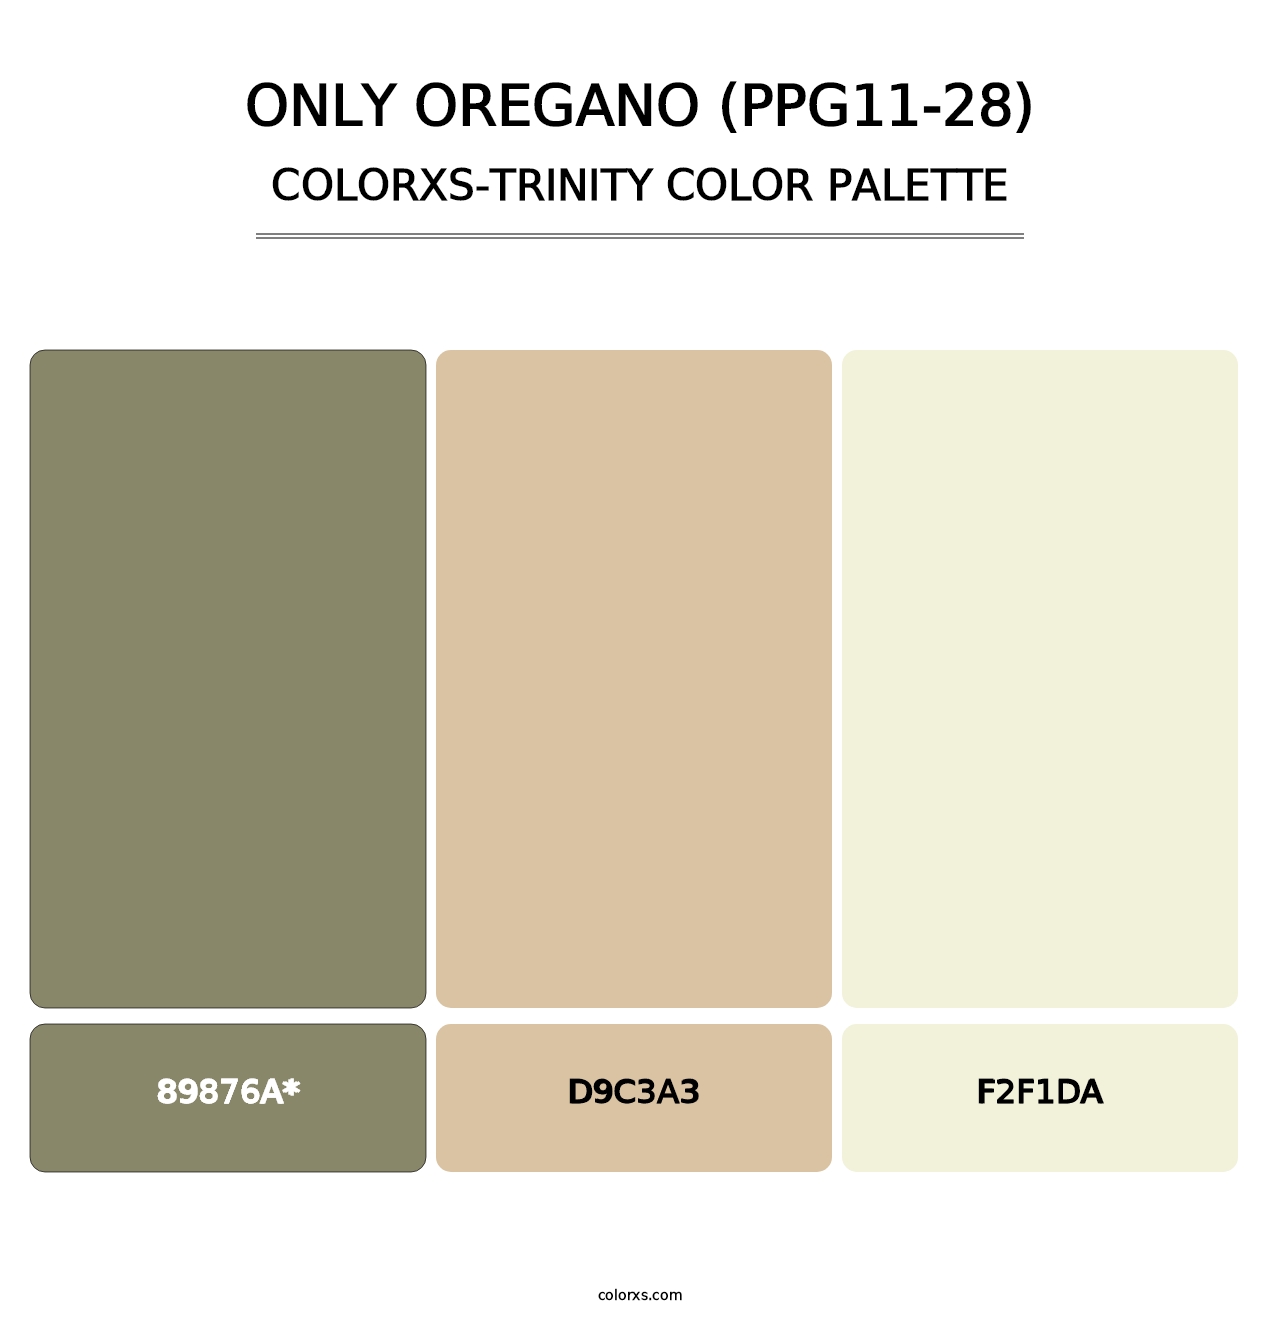 Only Oregano (PPG11-28) - Colorxs Trinity Palette